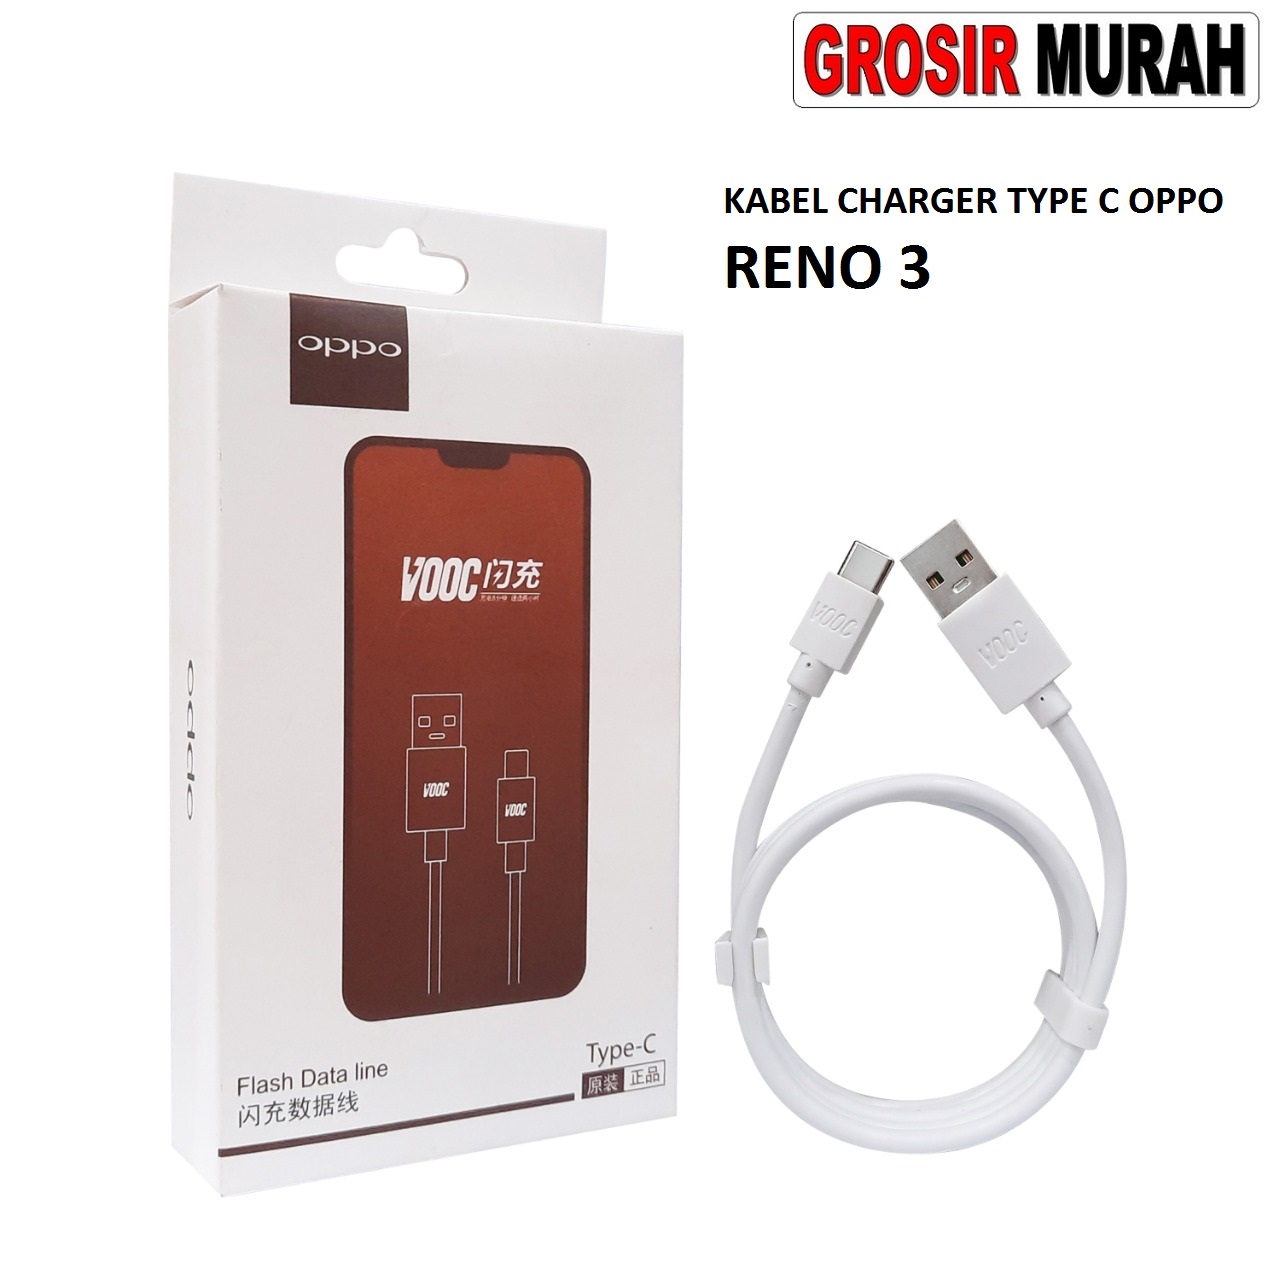 KABEL CHARGER OPPO RENO 3 TYPE C VOOC Data Cable Charge Fast Charging Usb Type C Super Vooc Spare Part Grosir Sparepart hp